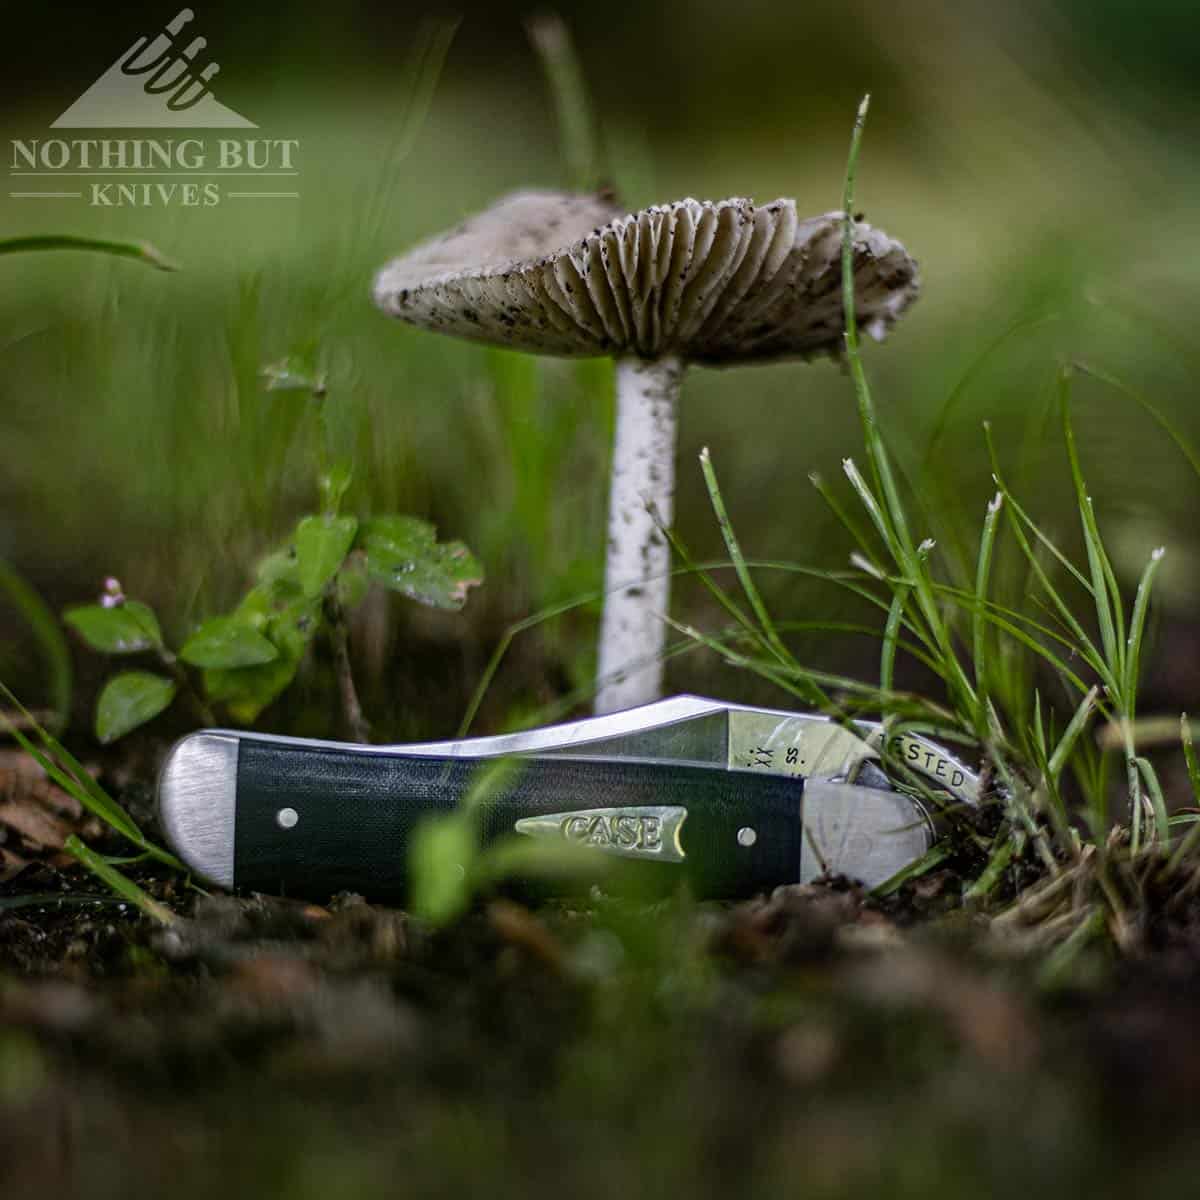 The Case RussLock folding knife leaning against a mushroom in a green field outdoors. 